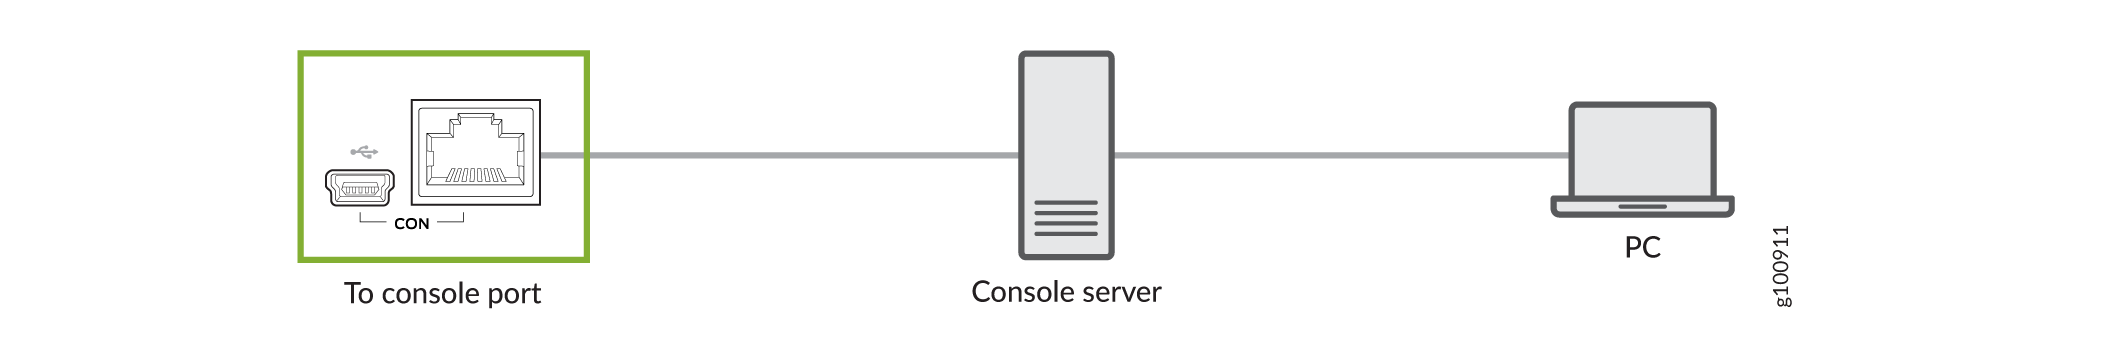 Connect the PTX10016 Router to a Management Console Through a Console Server